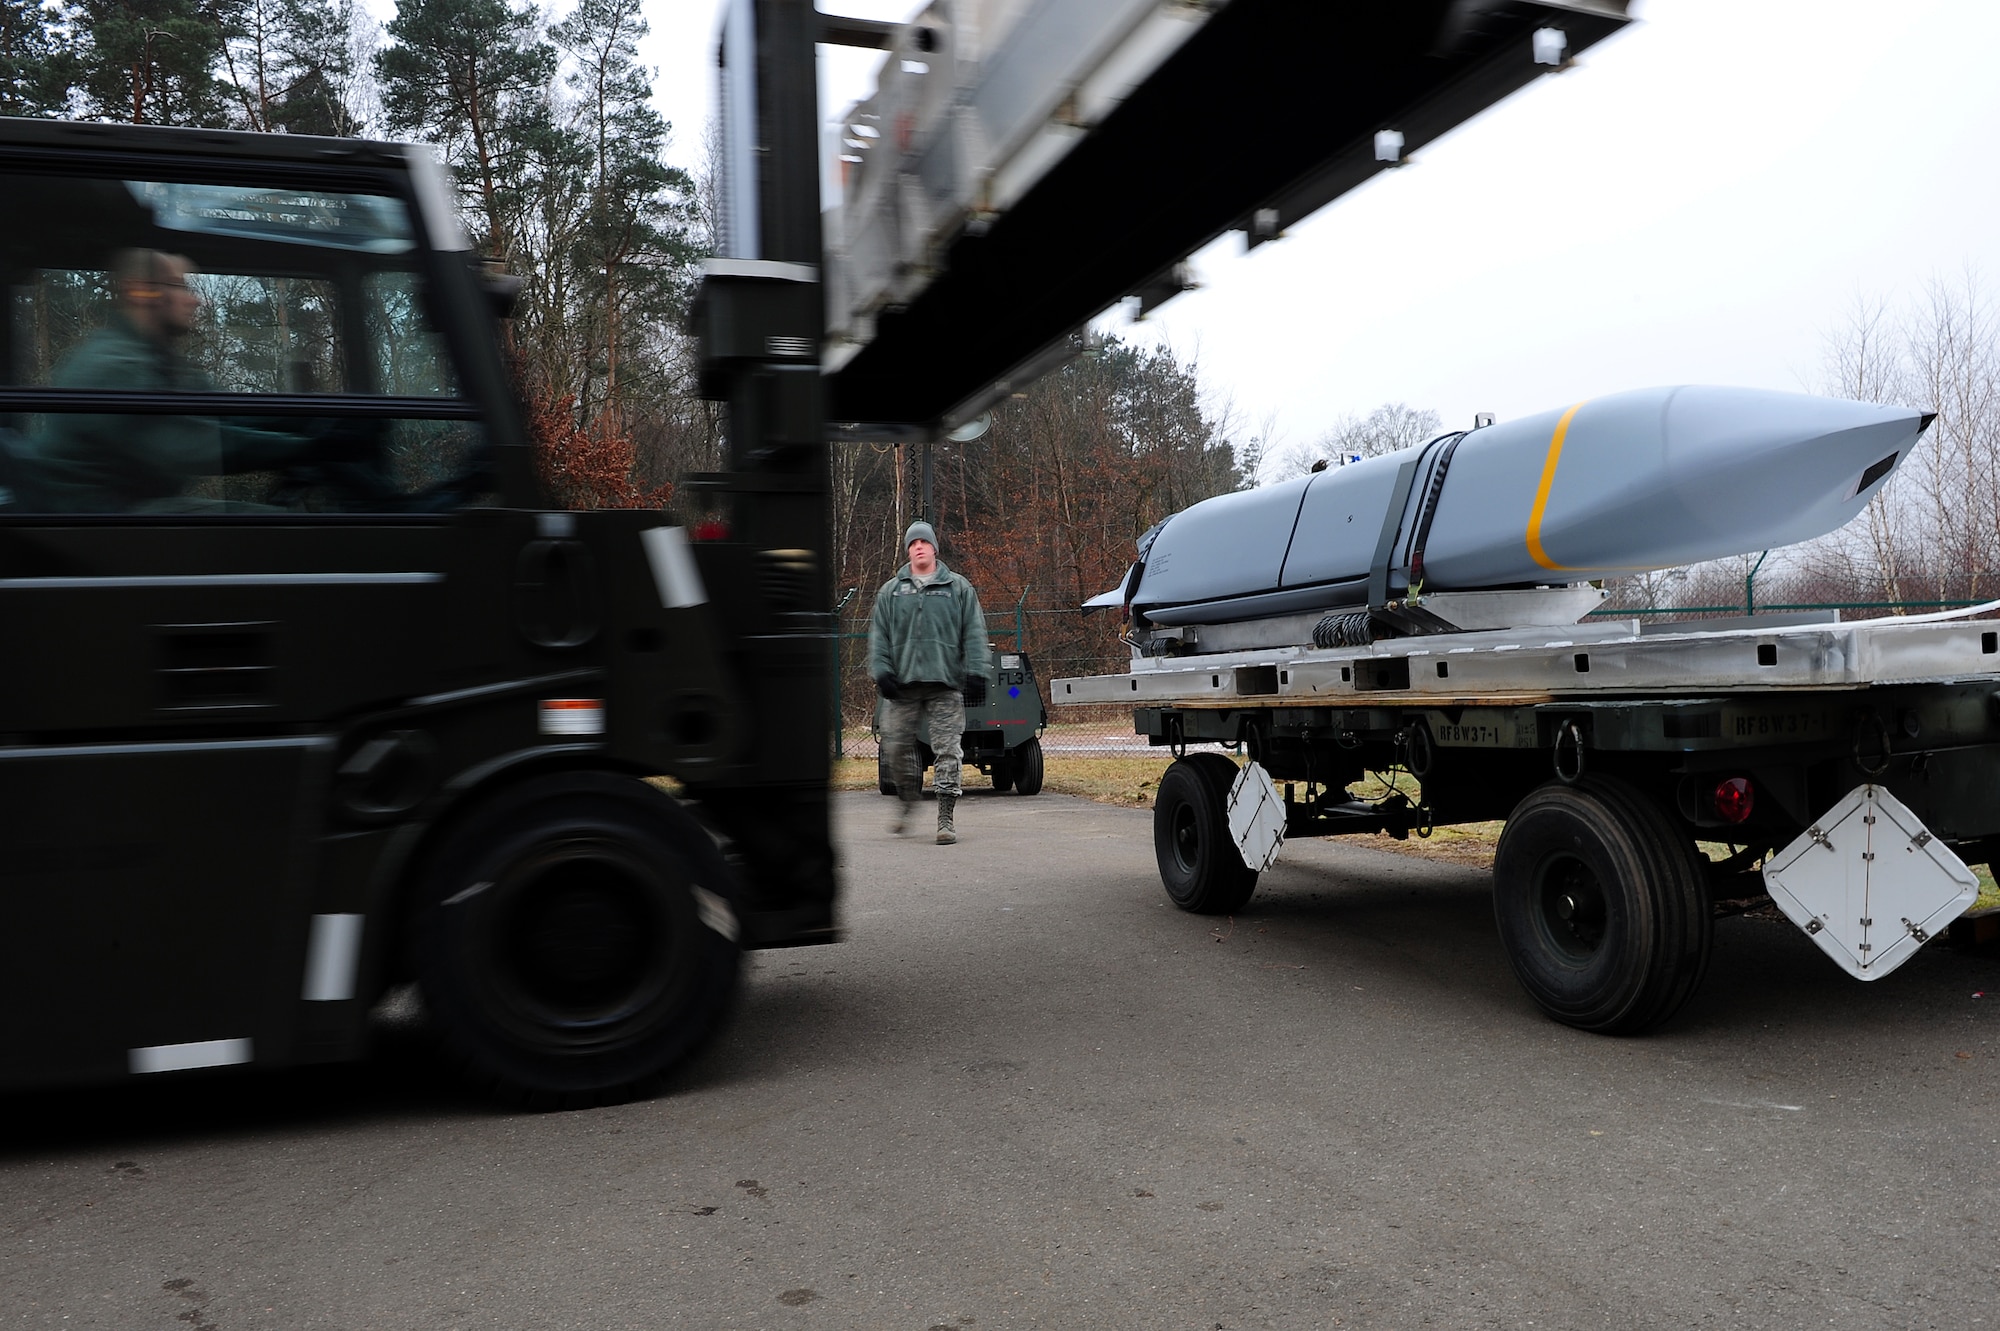 U.S. Air Force Airmen from the 86th Munitions Squadron get in position to secure a joint air-to-surface standoff missile, Ramstein Air Base, Germany, Feb. 1, 2011. The 2,000 pound, semi-stealth, long range weapon requires various maintenance and test operations to ensure its efficiency. (U.S. Air Force photo by Airman 1st Class Brea Miller)